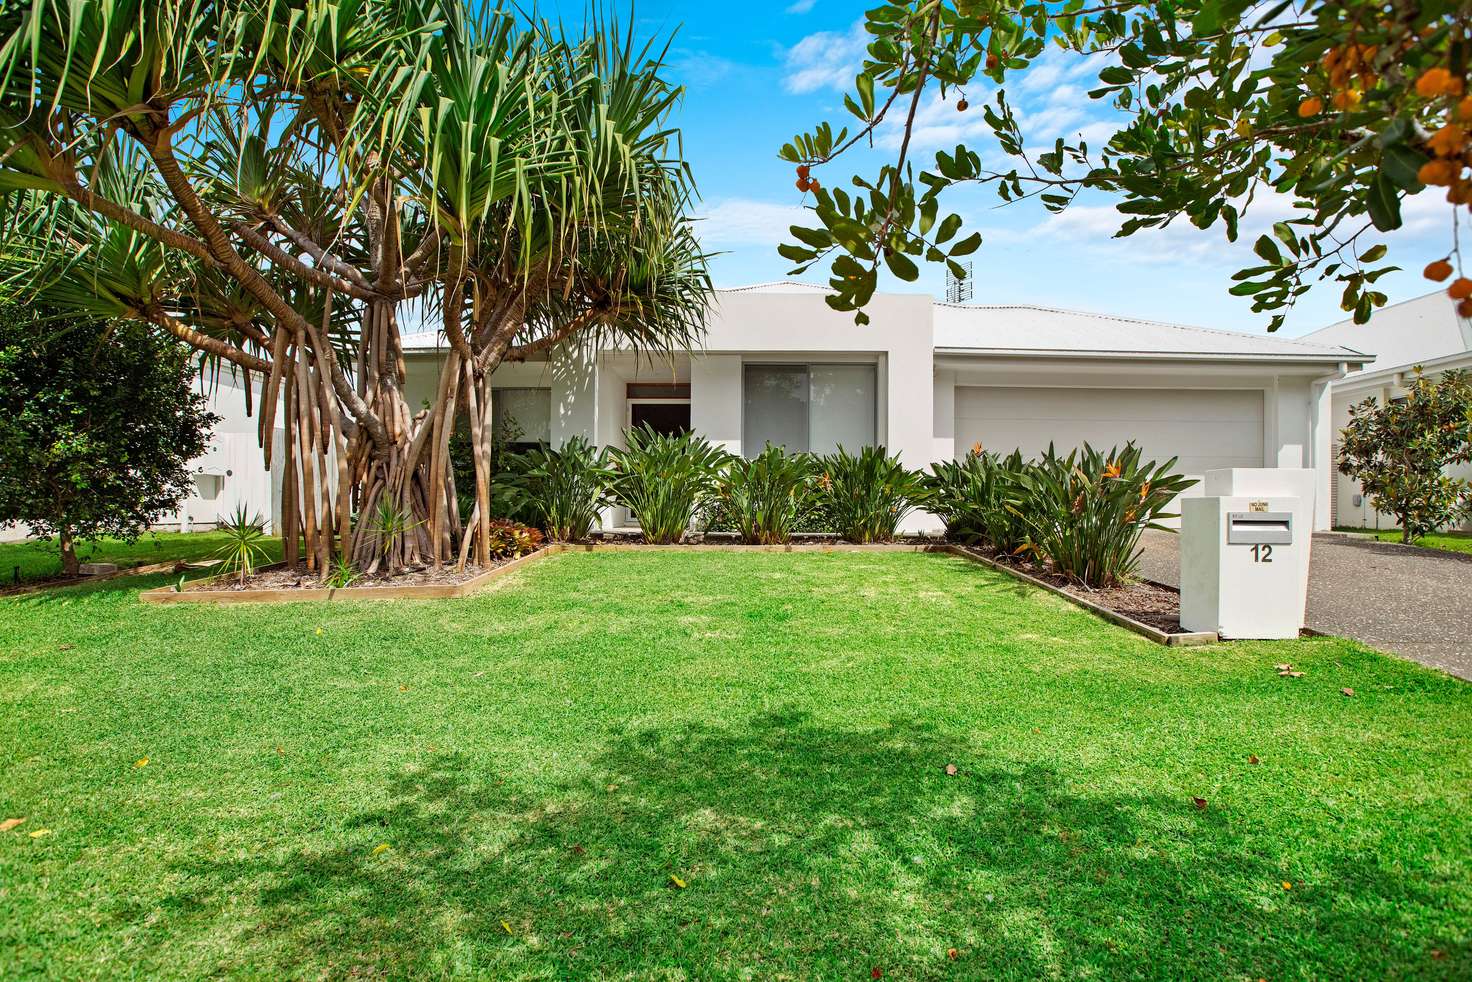 Main view of Homely house listing, 12 Mornington Crescent, Peregian Springs QLD 4573